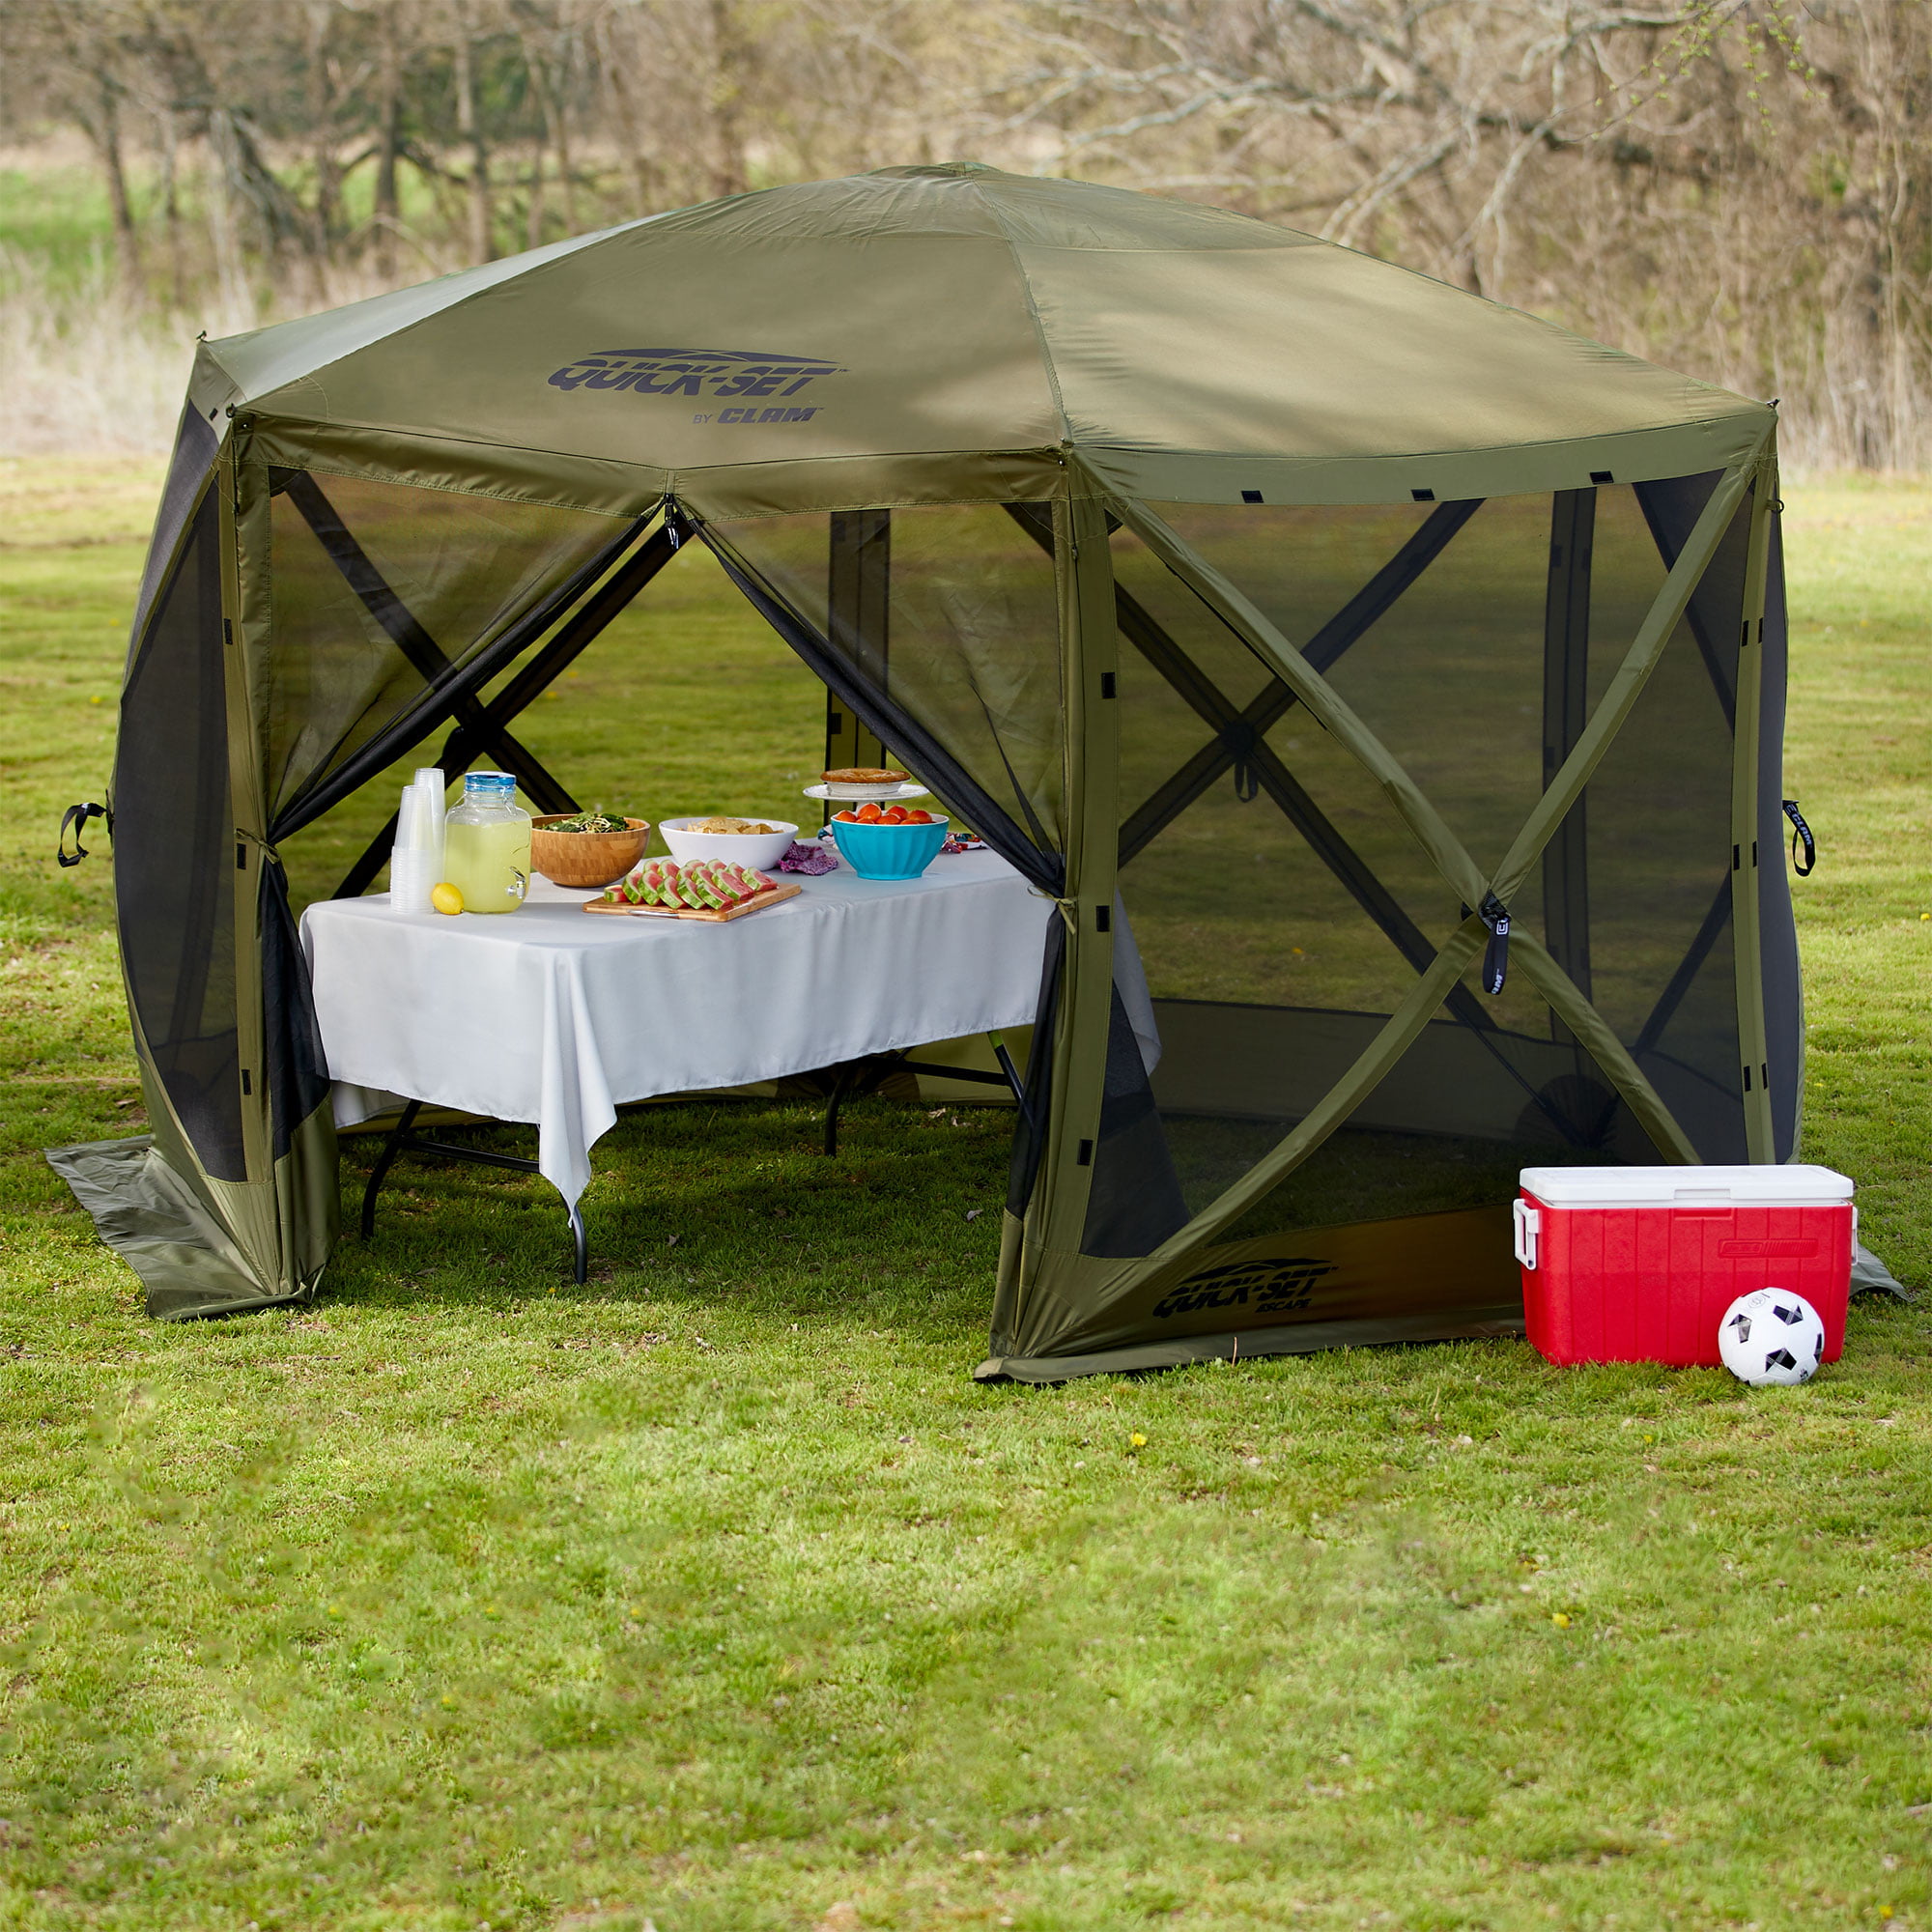 Clam Quick-set Escape 11.5 X 11.5 Ft Portable Pop Up Camping Outdoor Gazebo  Screen Tent Canopy Shelter & Carry Bag With 6 Wind & Sun Panels Accessory :  Target